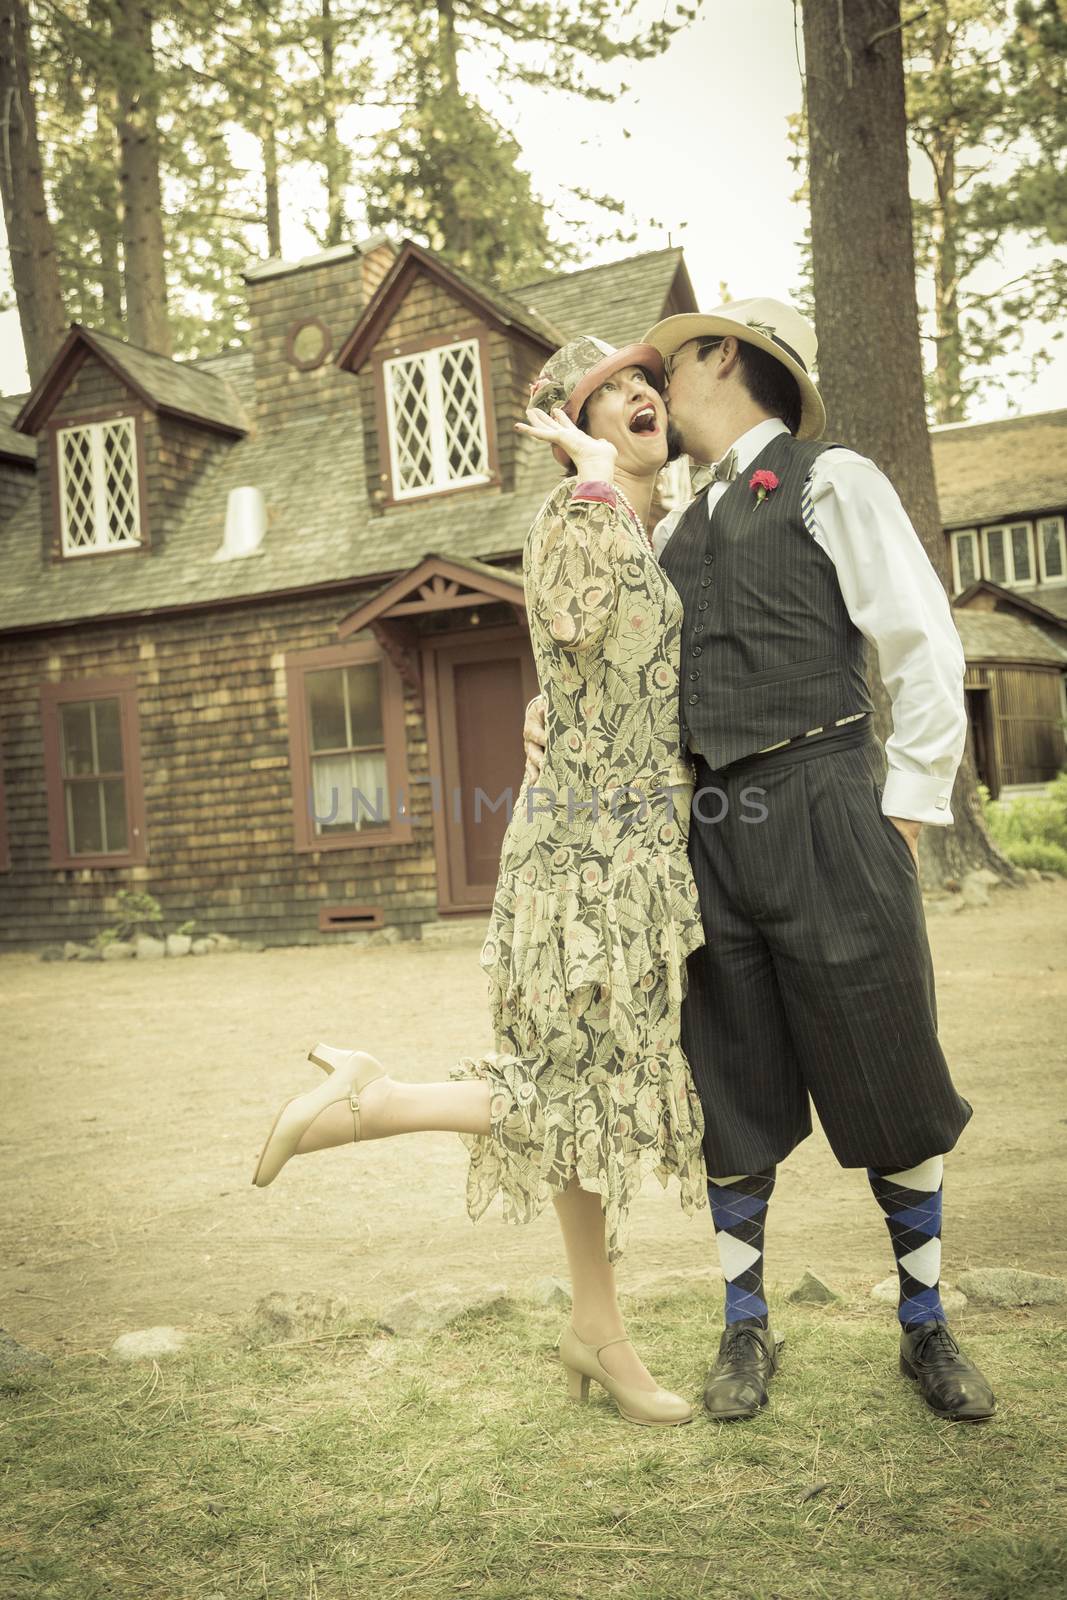 1920s Dressed Romantic Couple in Front of Old Cabin by Feverpitched